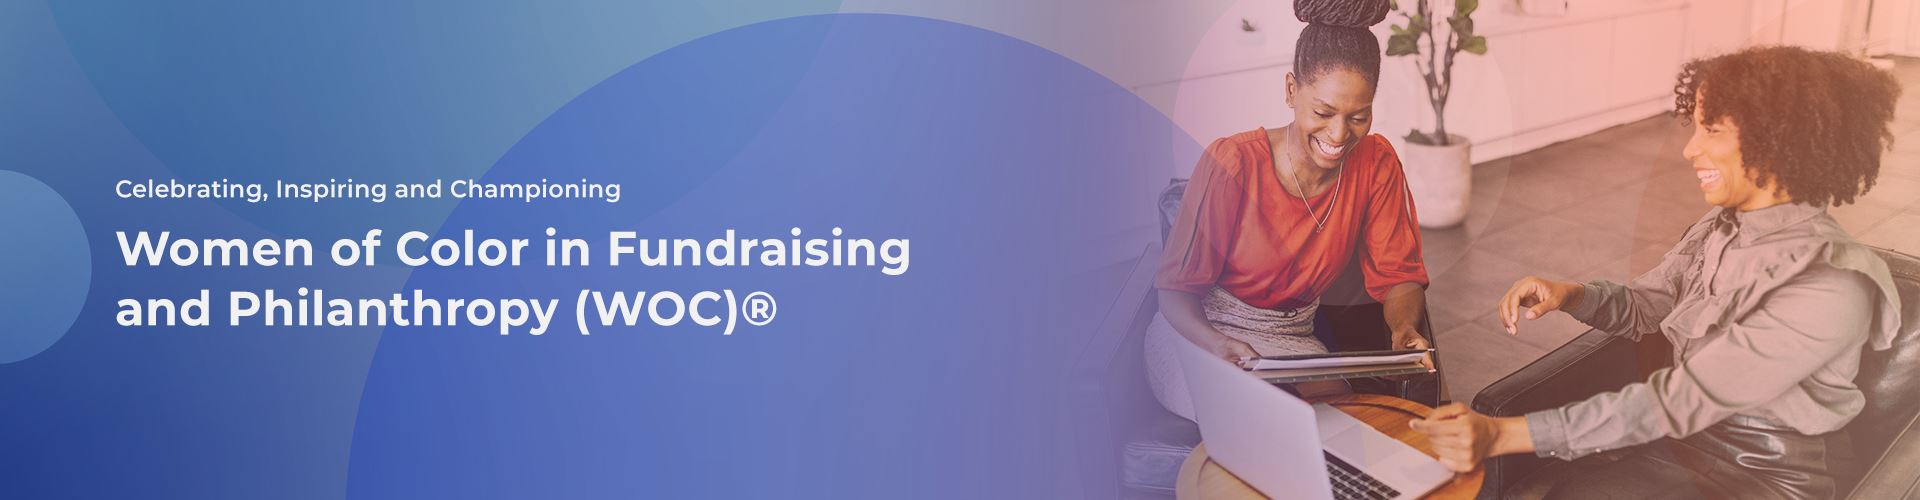 Hero banner featuring two Black women collaborating on shared laptop. Text reads "Celebrating, inspiring and championing Women of Color in Fundraising and Philanthropy (WOC)"